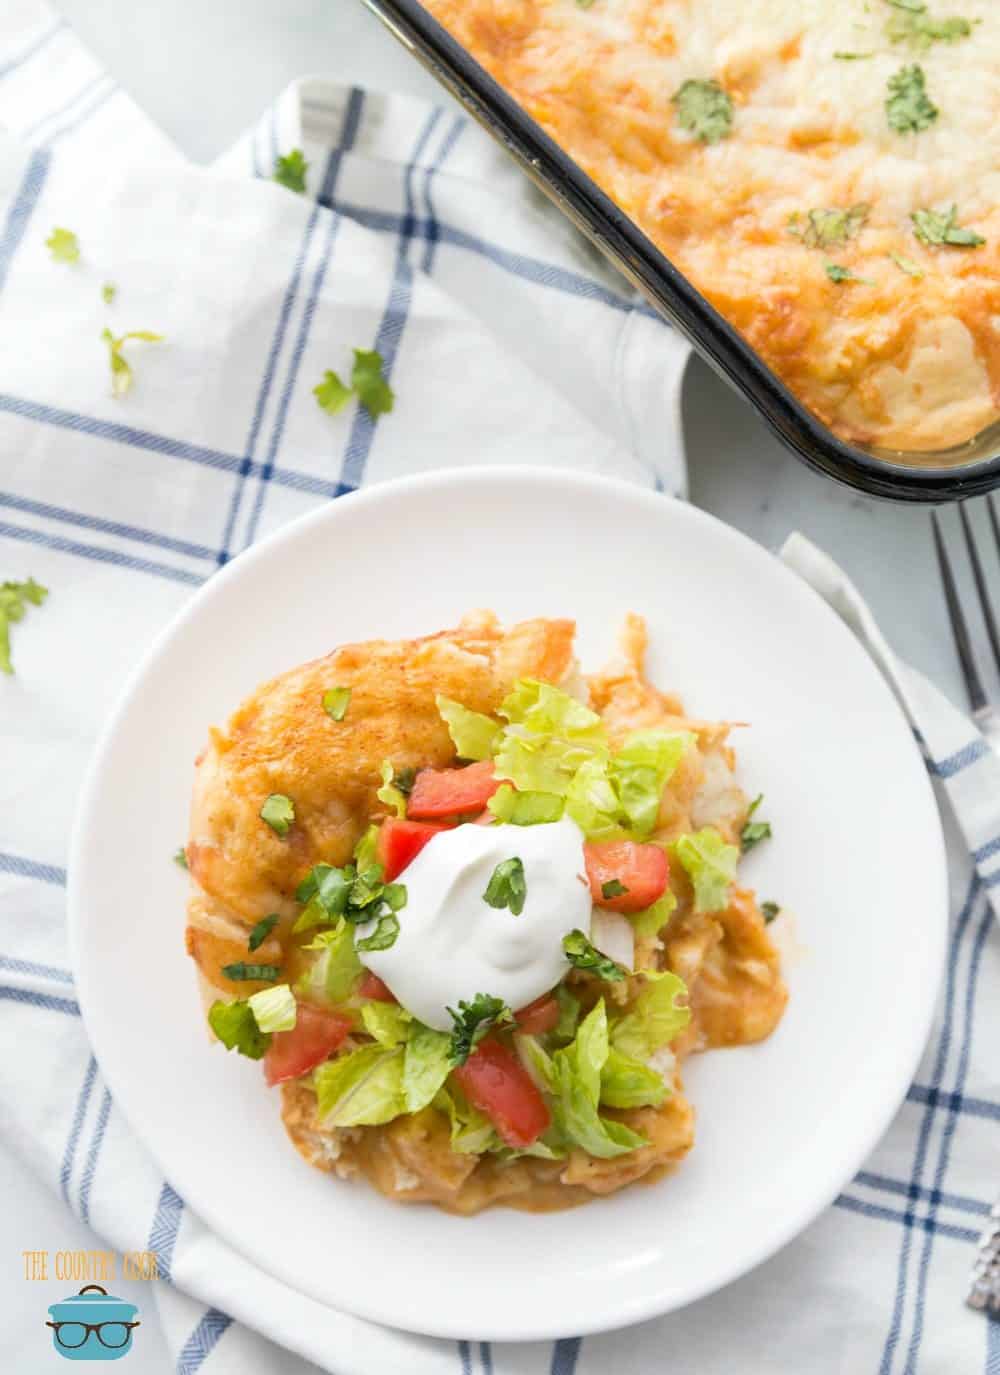 chicken enchilada casserole shown topped with lettuce, tomato and sour cream on a small round white plate.